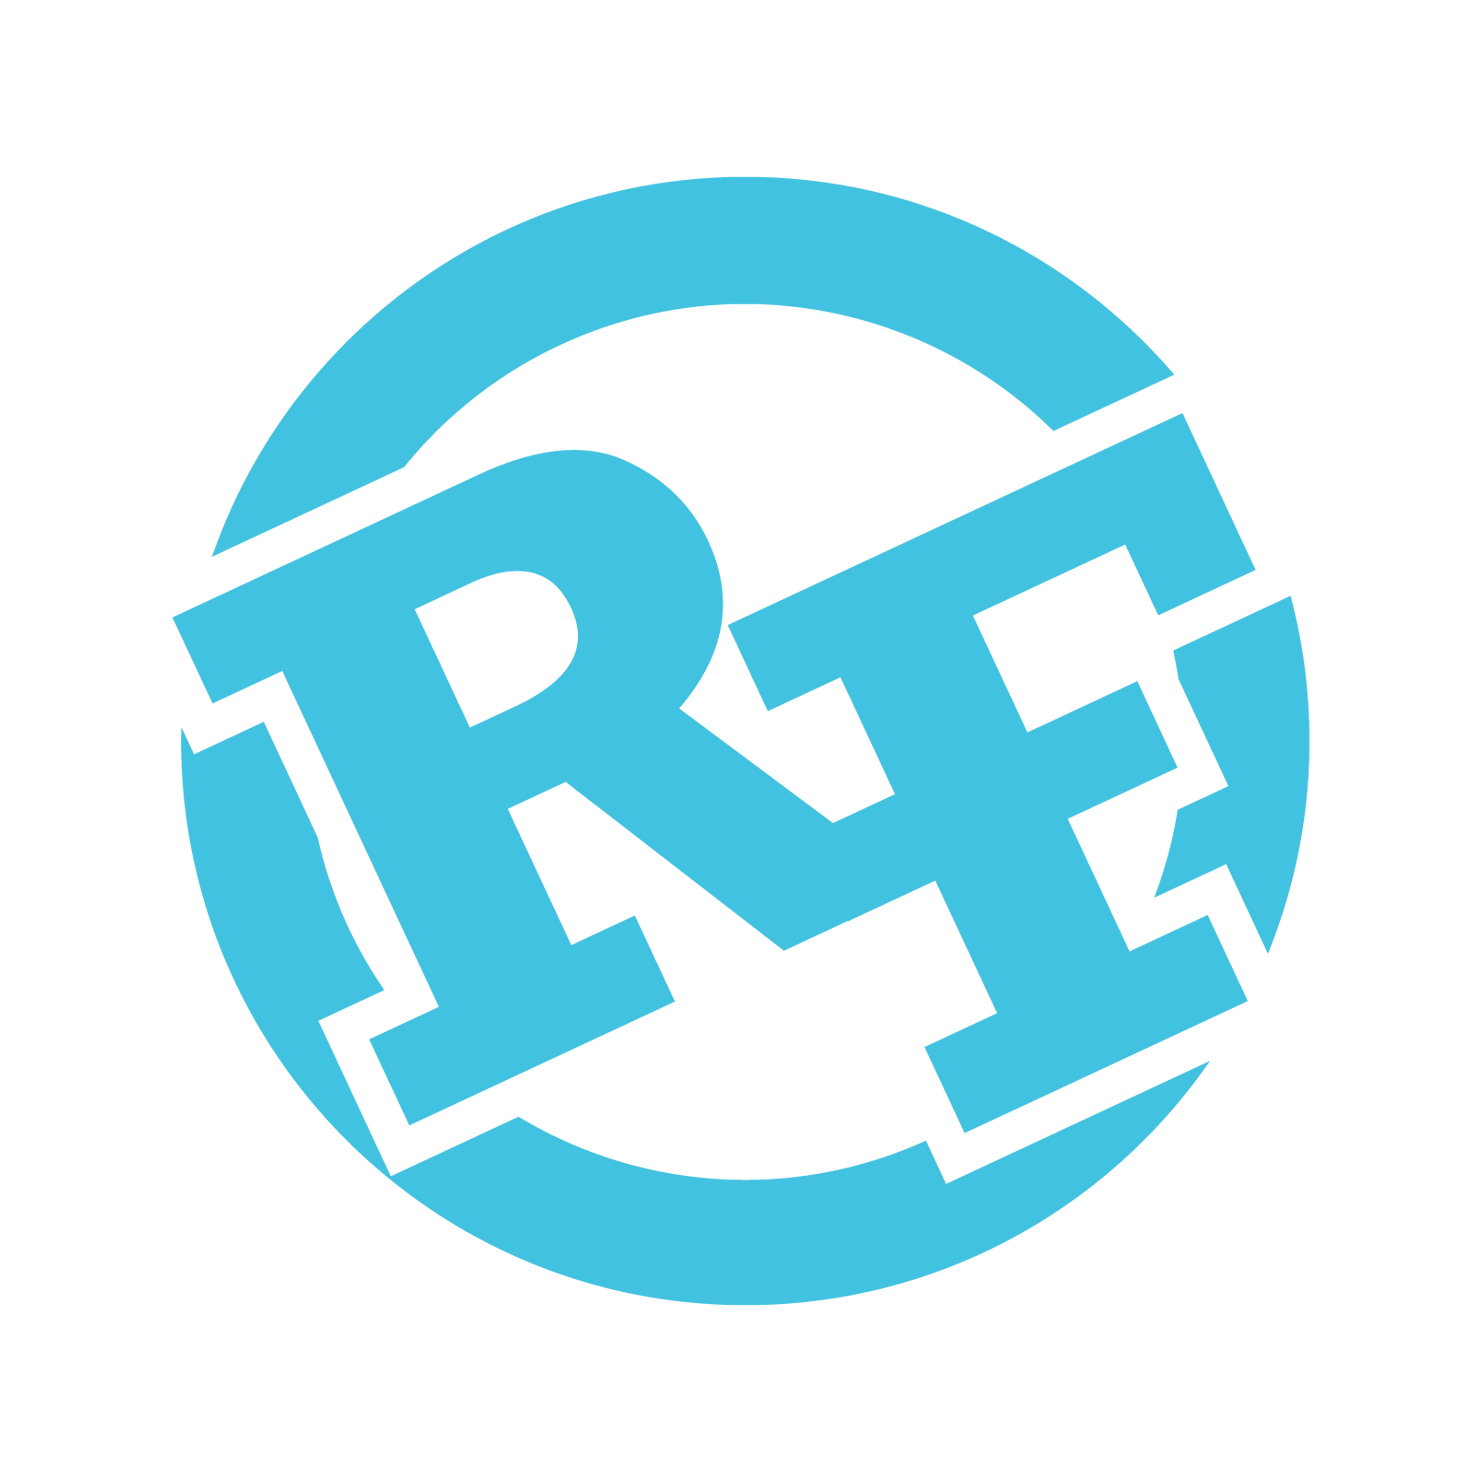 The letter r is in a blue circle on a white background.